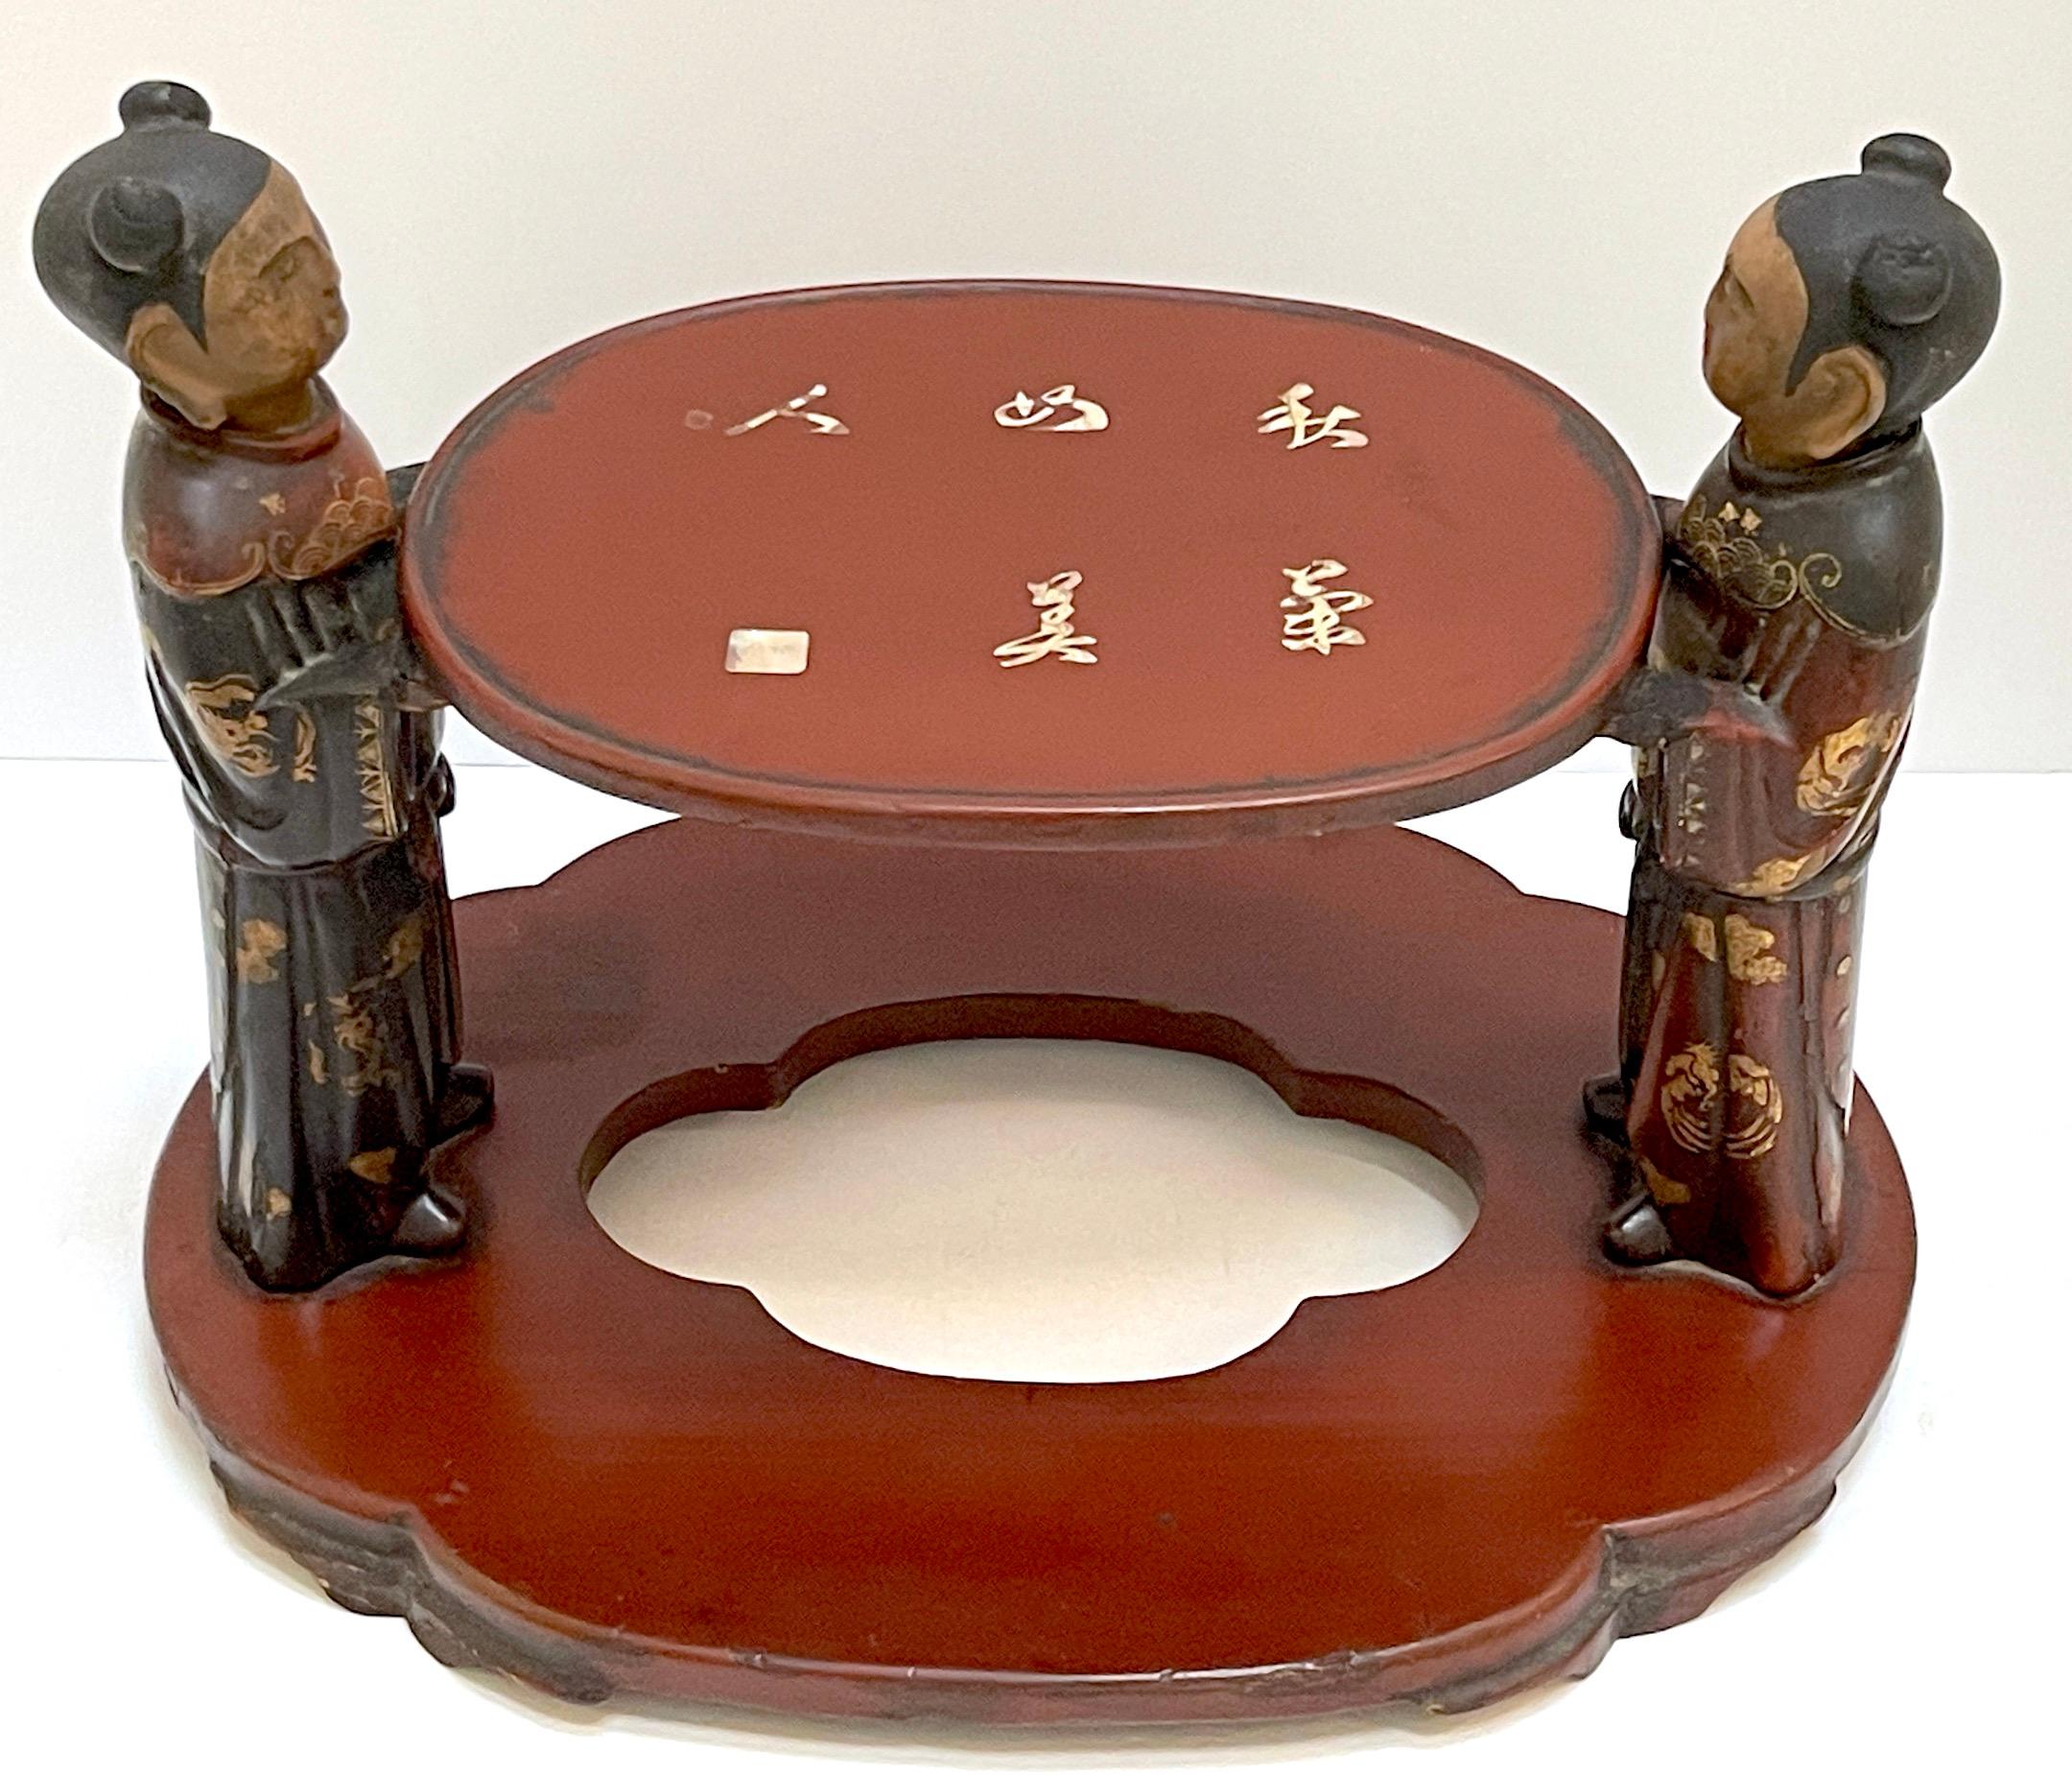 19th C. Chinese Figural Carved Wood Lacquer Scholars/ Offering / Opium Stand
Chinese 19th Century 

A truly unique and remarkable piece from 19th-century China, this figural carved wood lacquer stand embodies the intricate craftsmanship and cultural